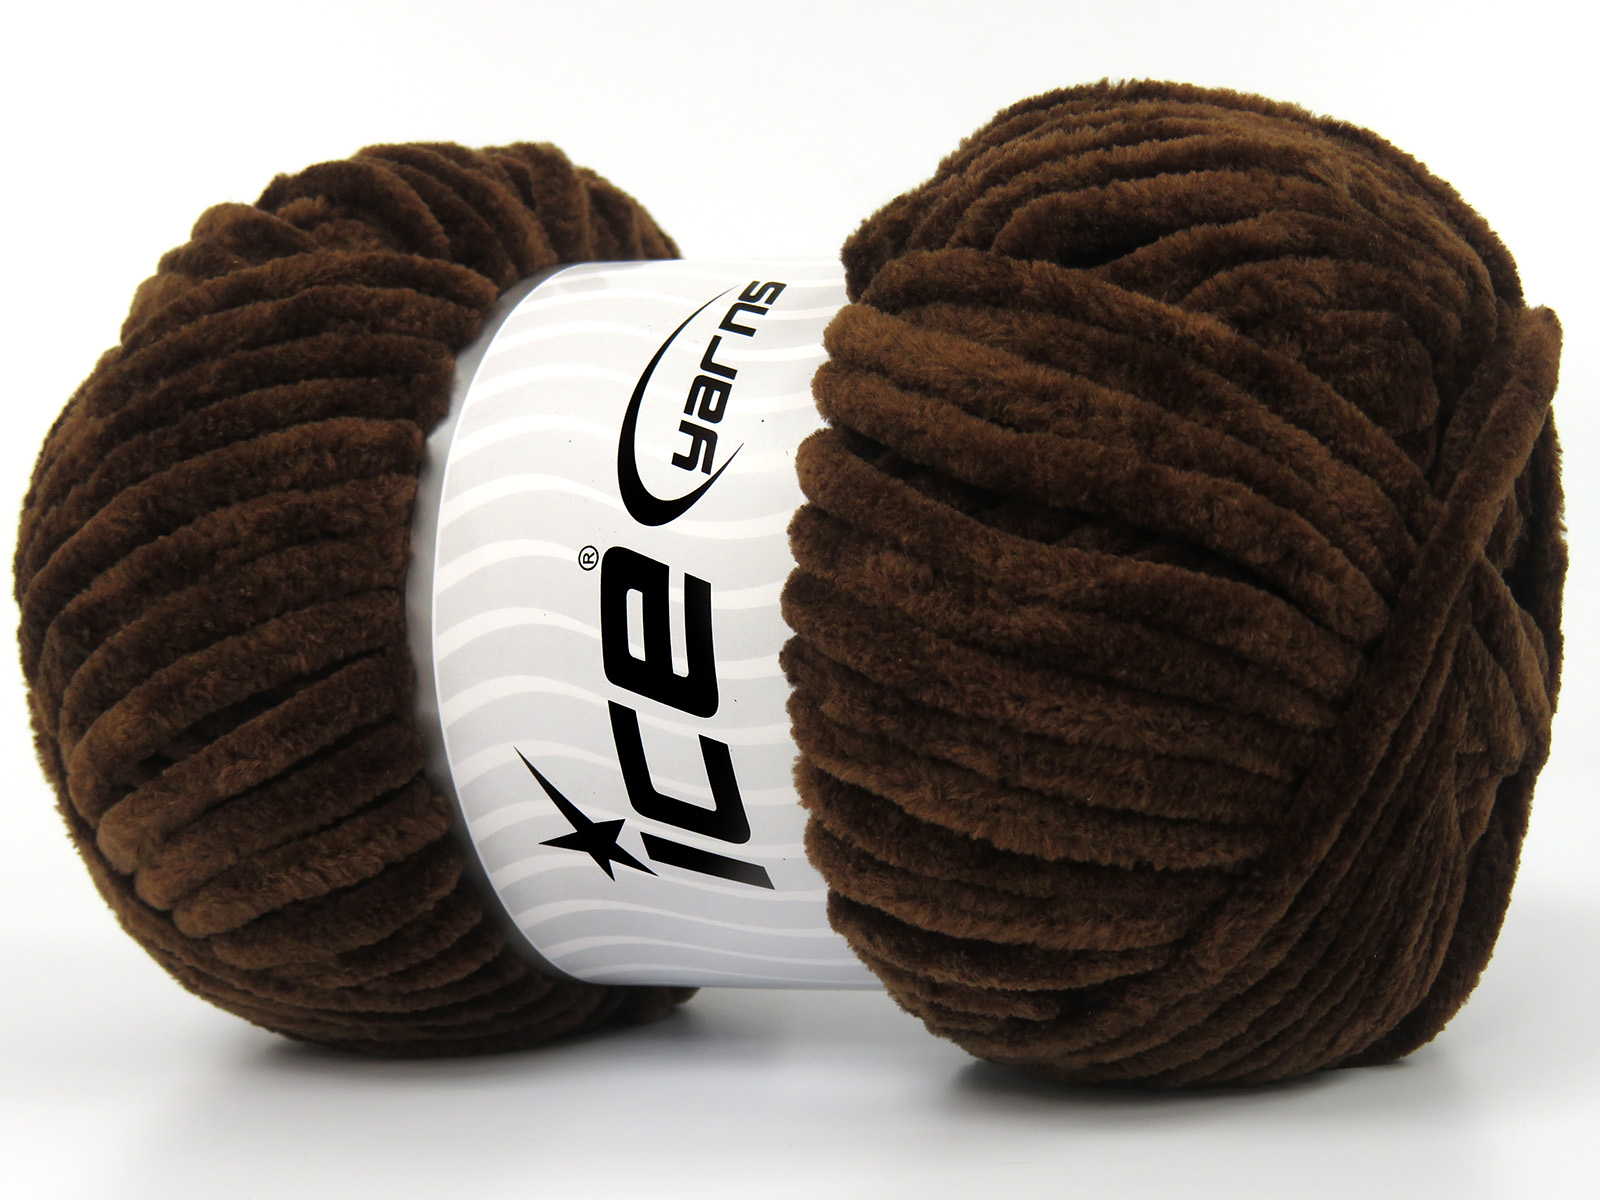 Chenille Baby Brown at Ice Yarns Online Yarn Store